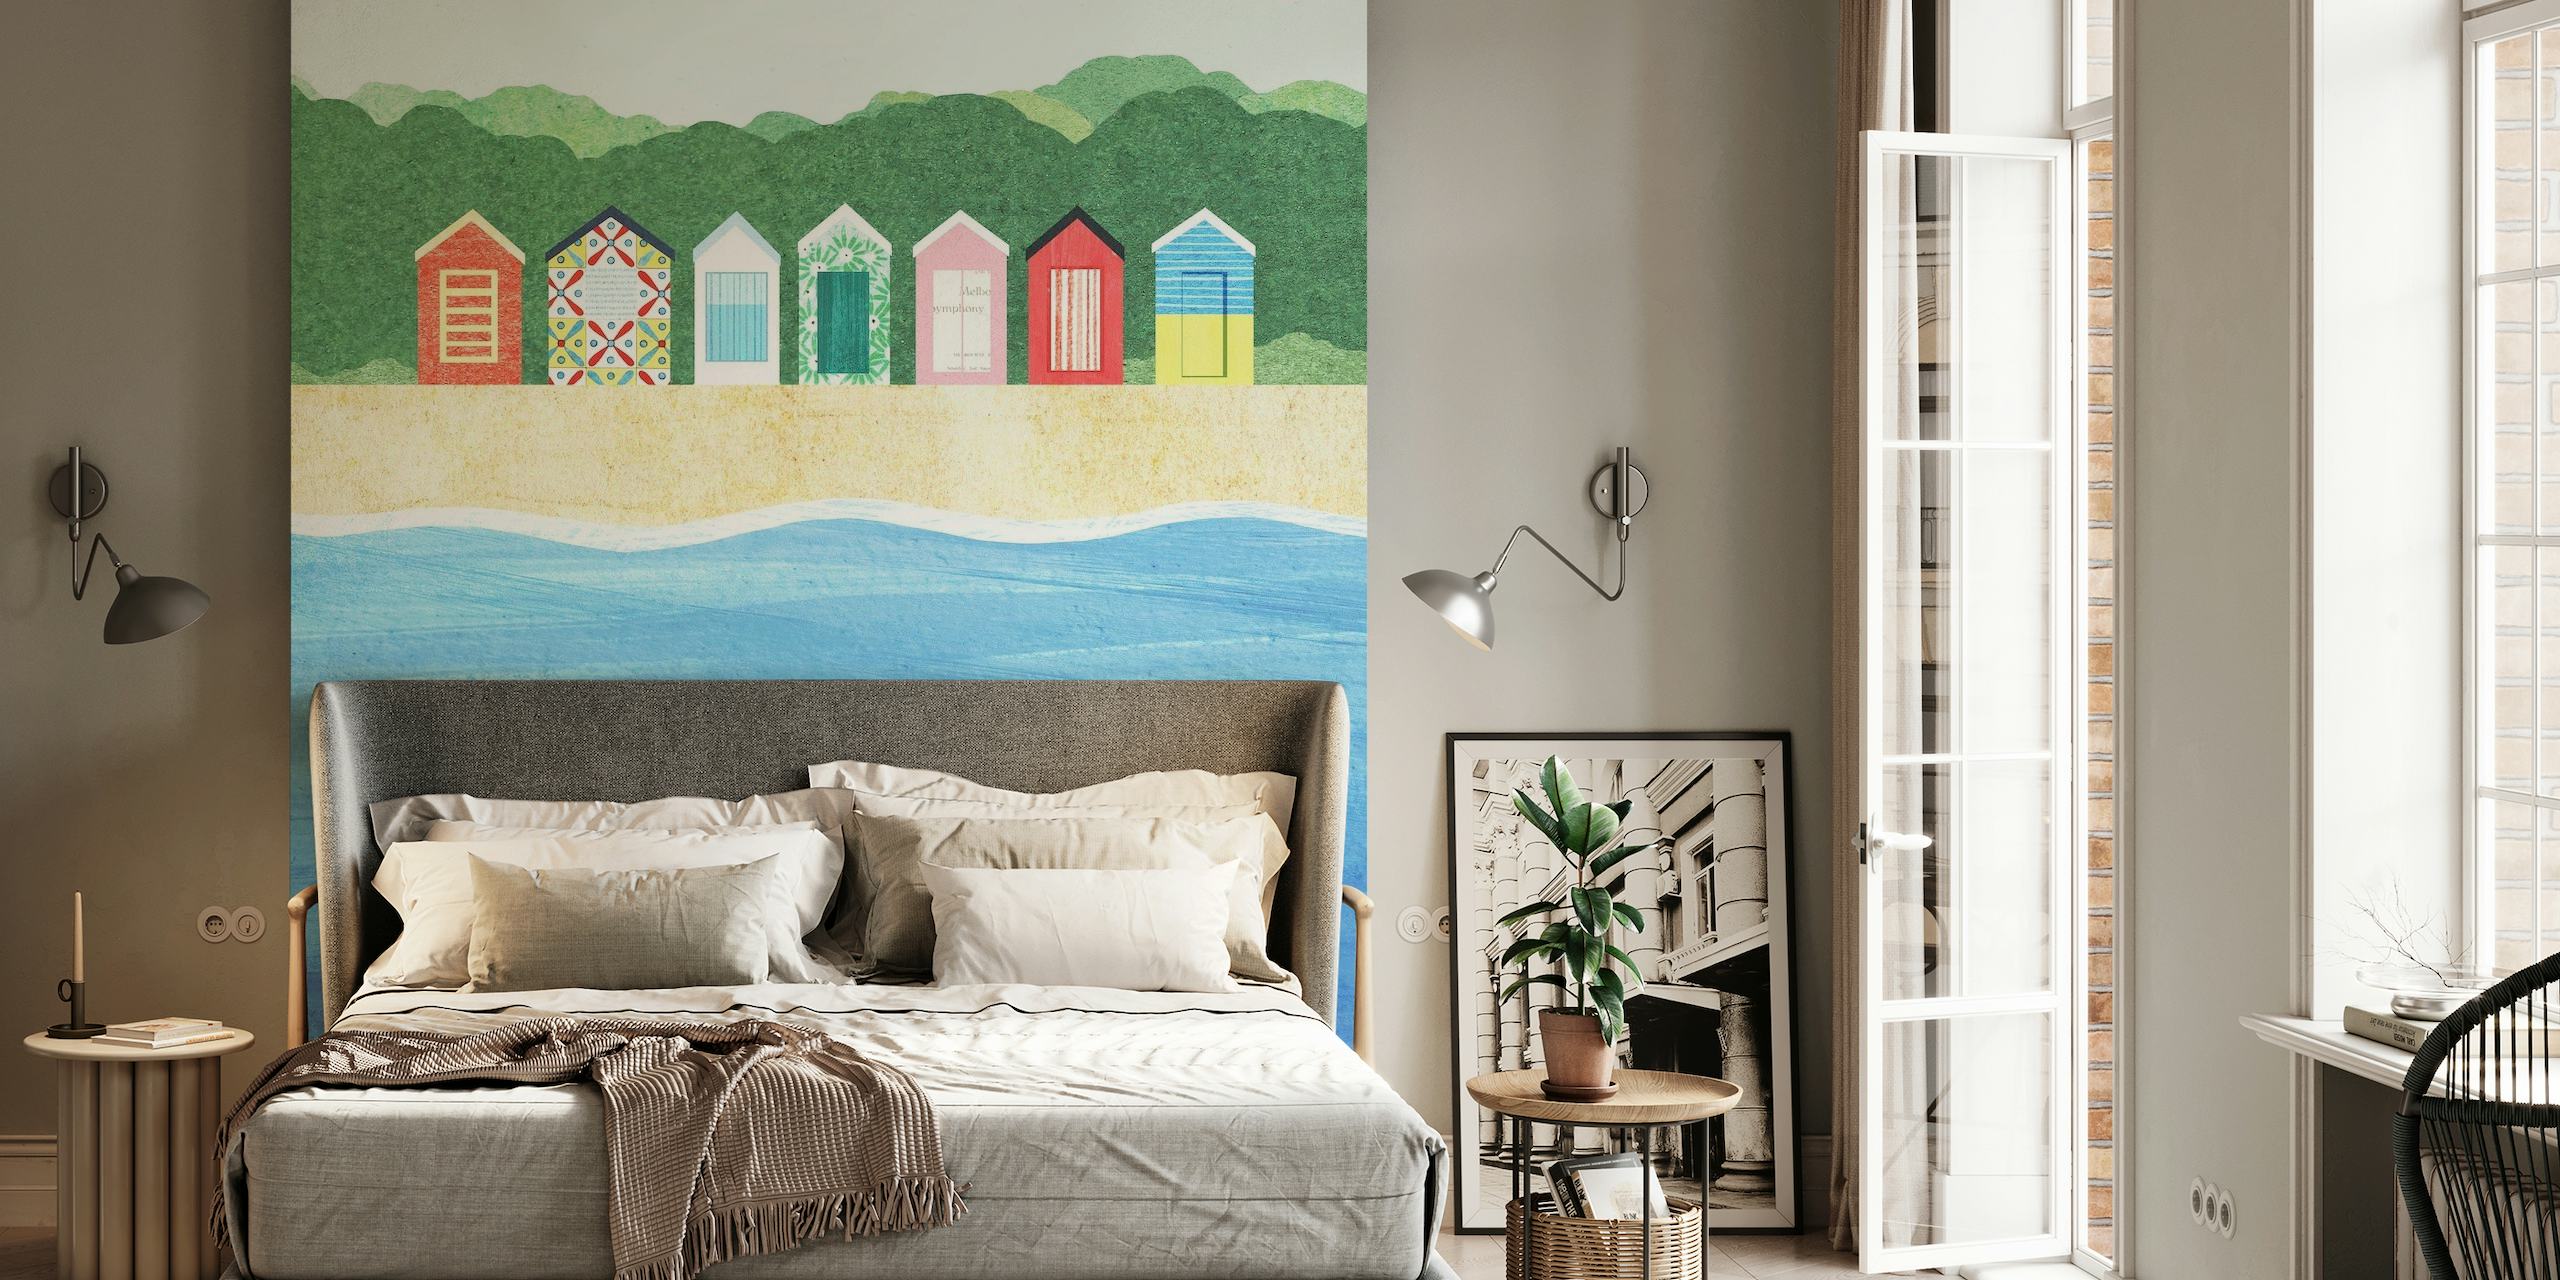 Colorful beach huts wall mural featuring seaside huts with a calm ocean view.